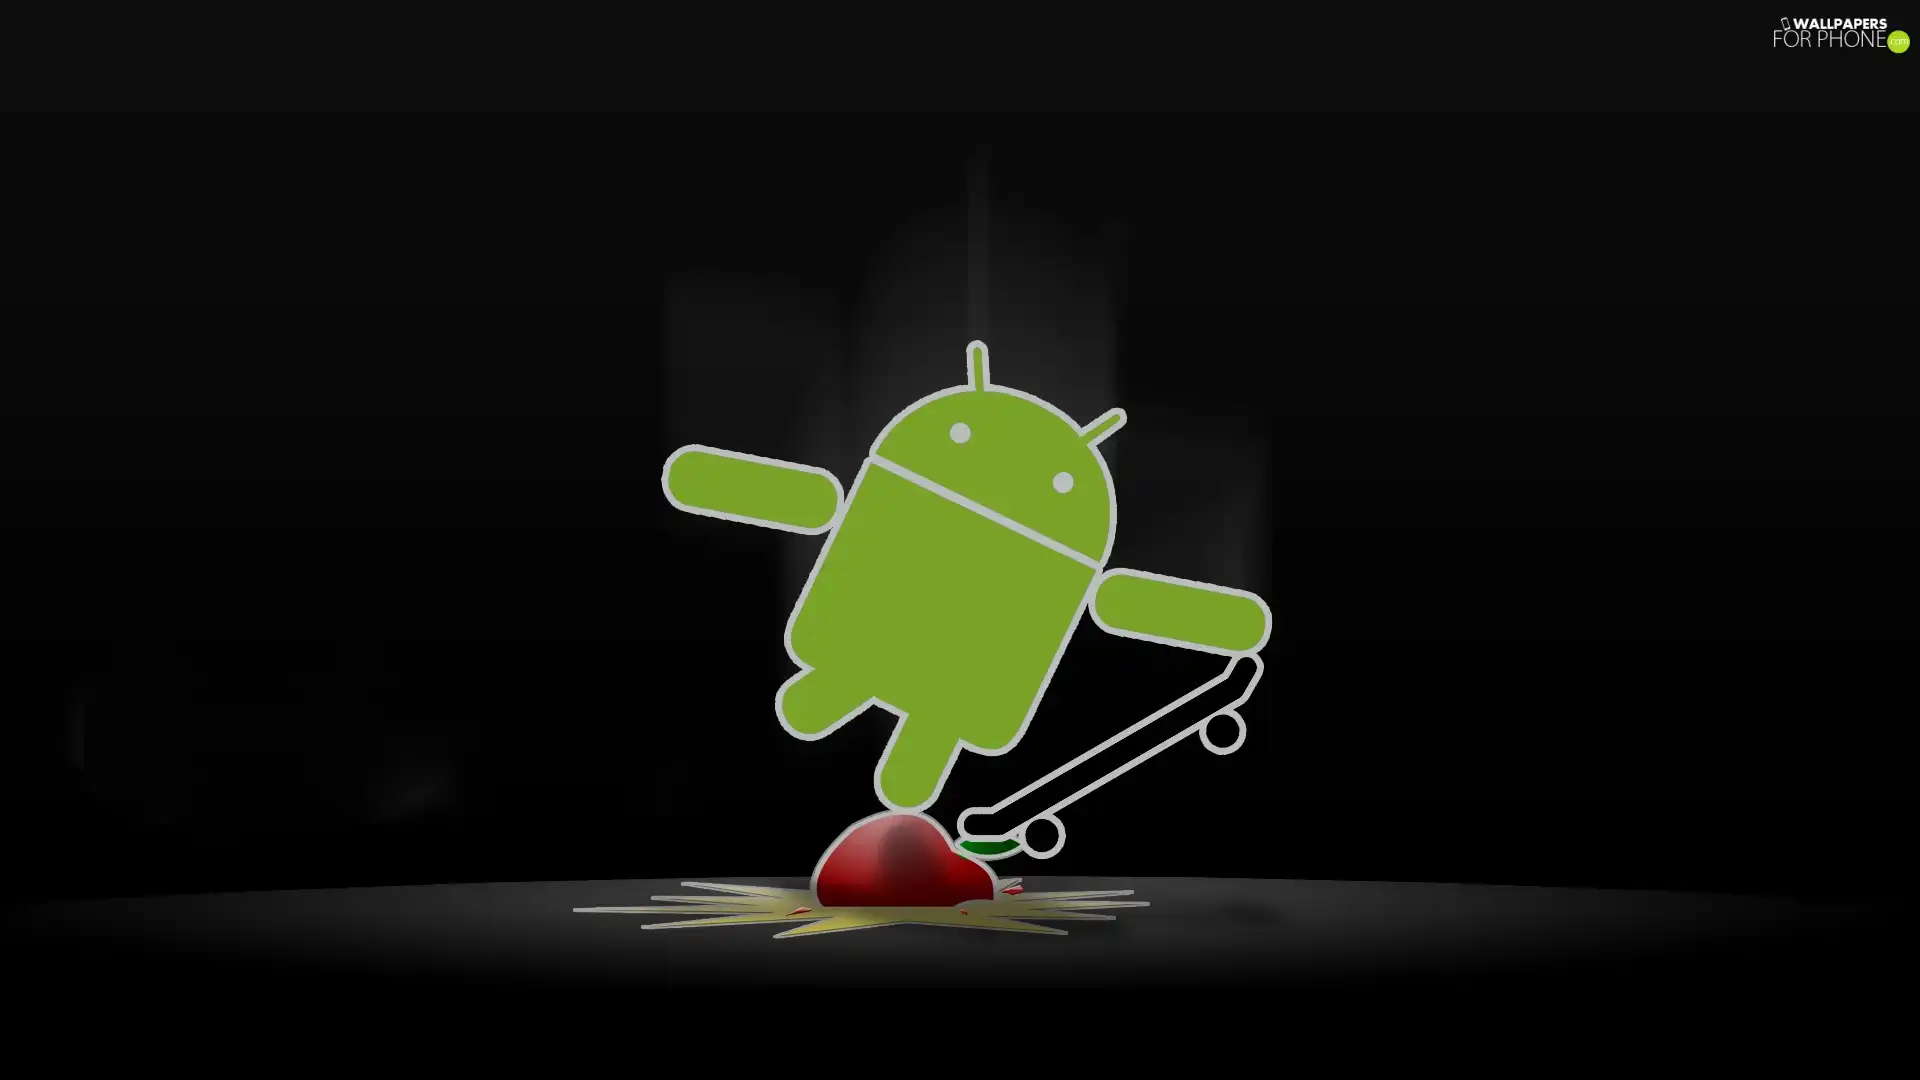 Apple, Android, skate